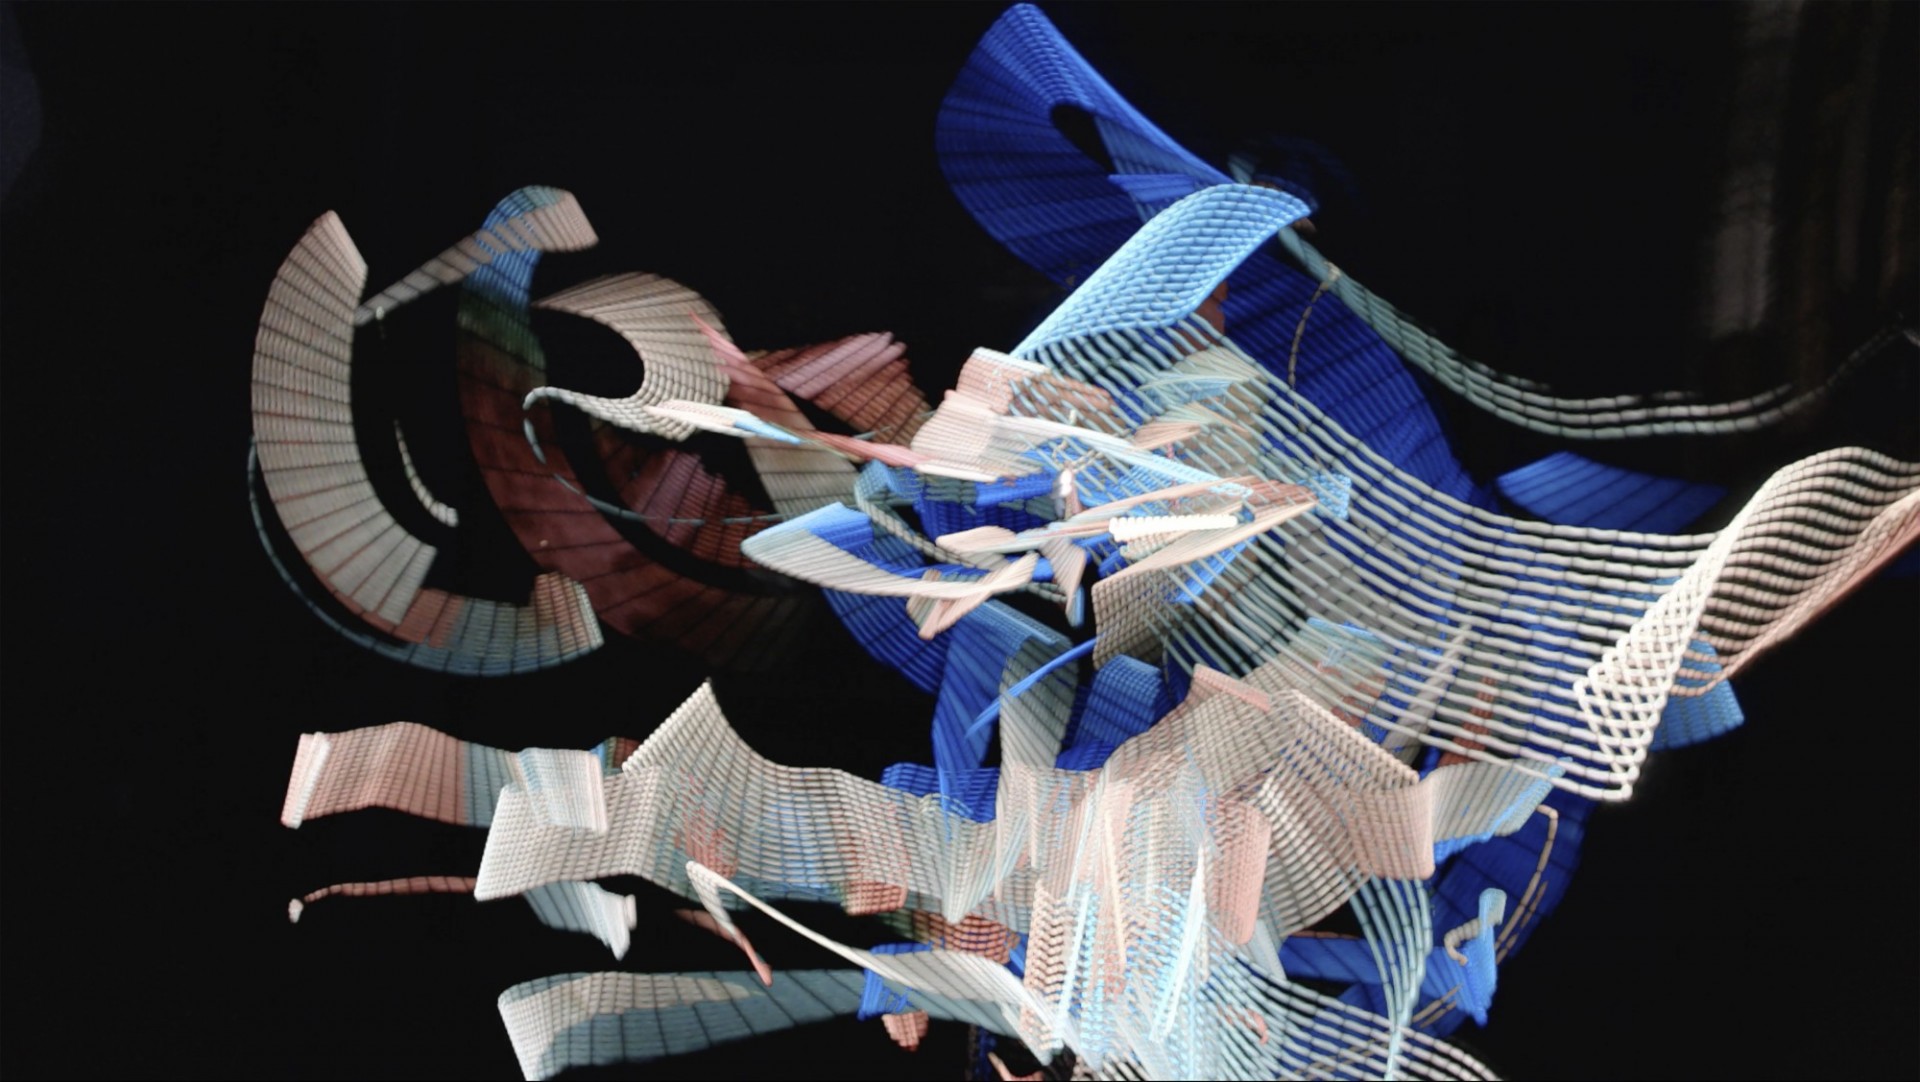 Light painting based on mapping data by Lori Hepner.